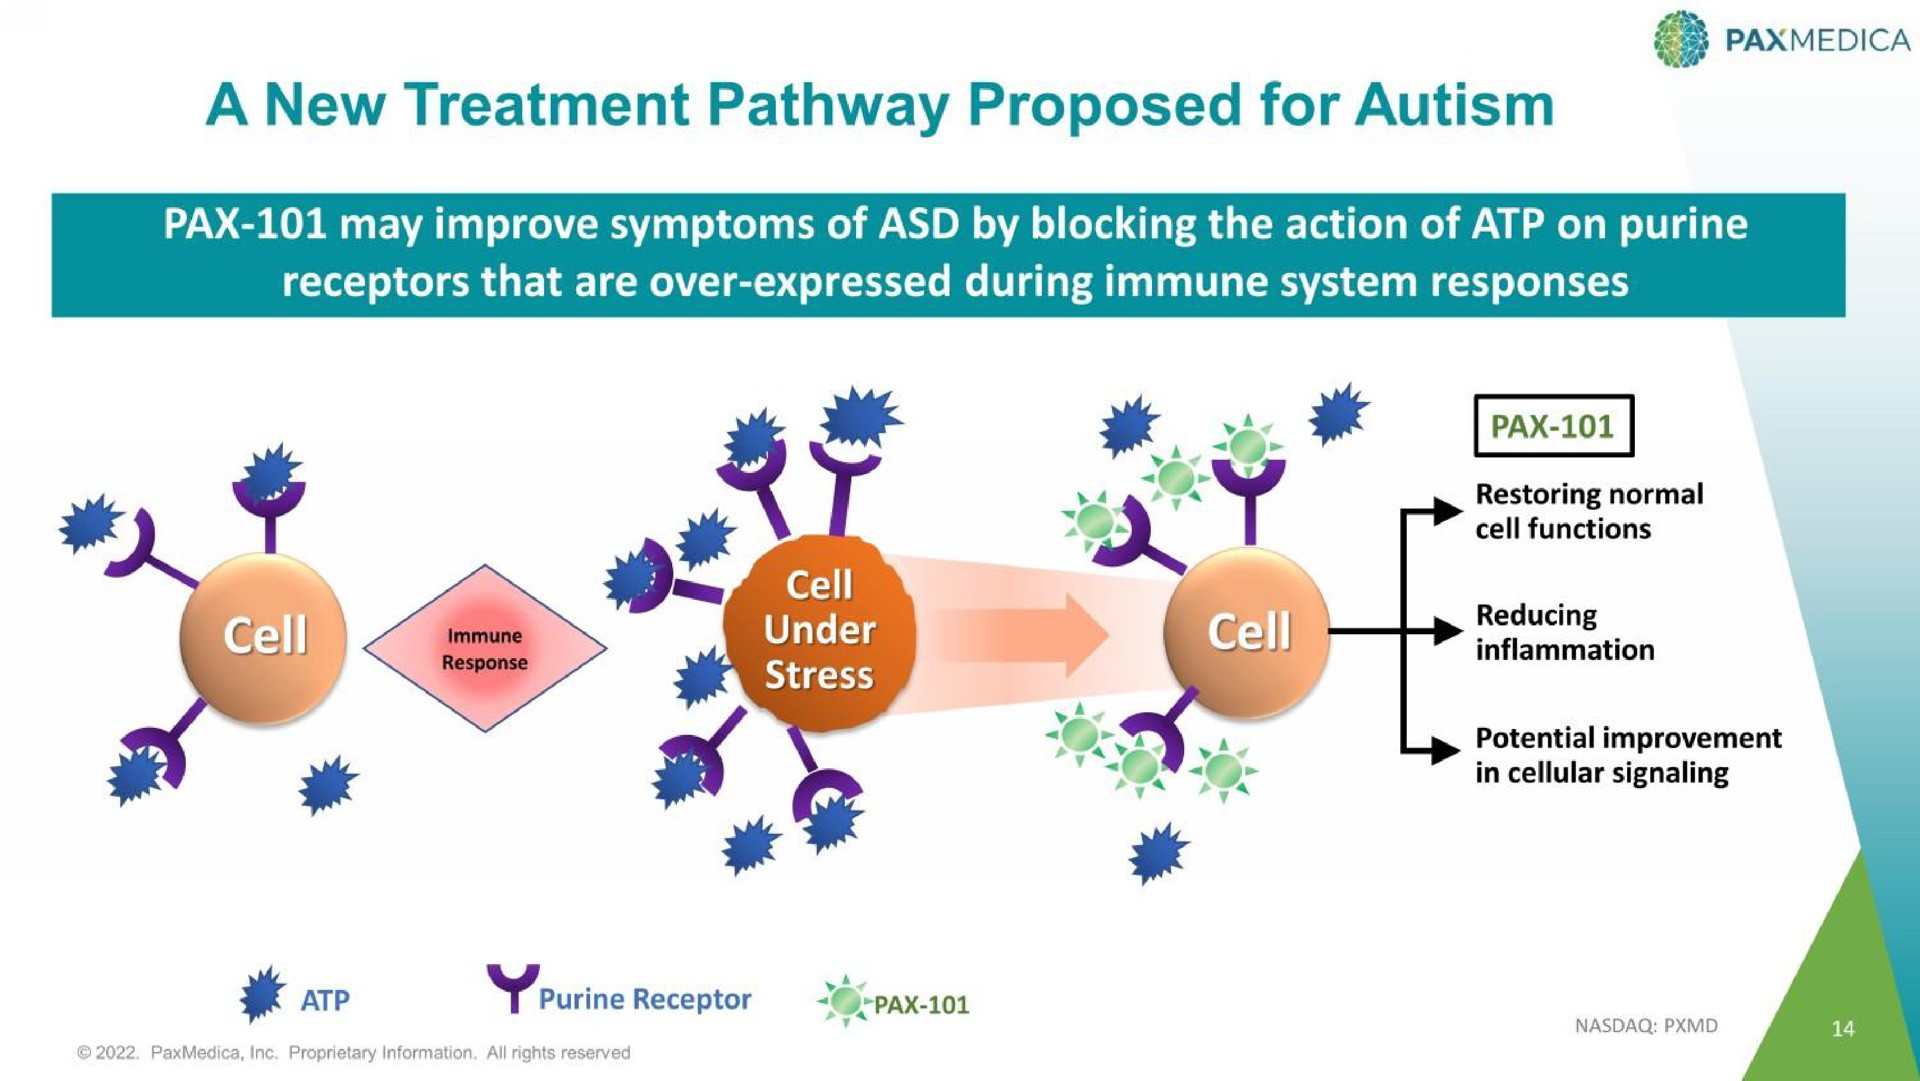 a new treatment pathway proposed for autism | PaxMedica